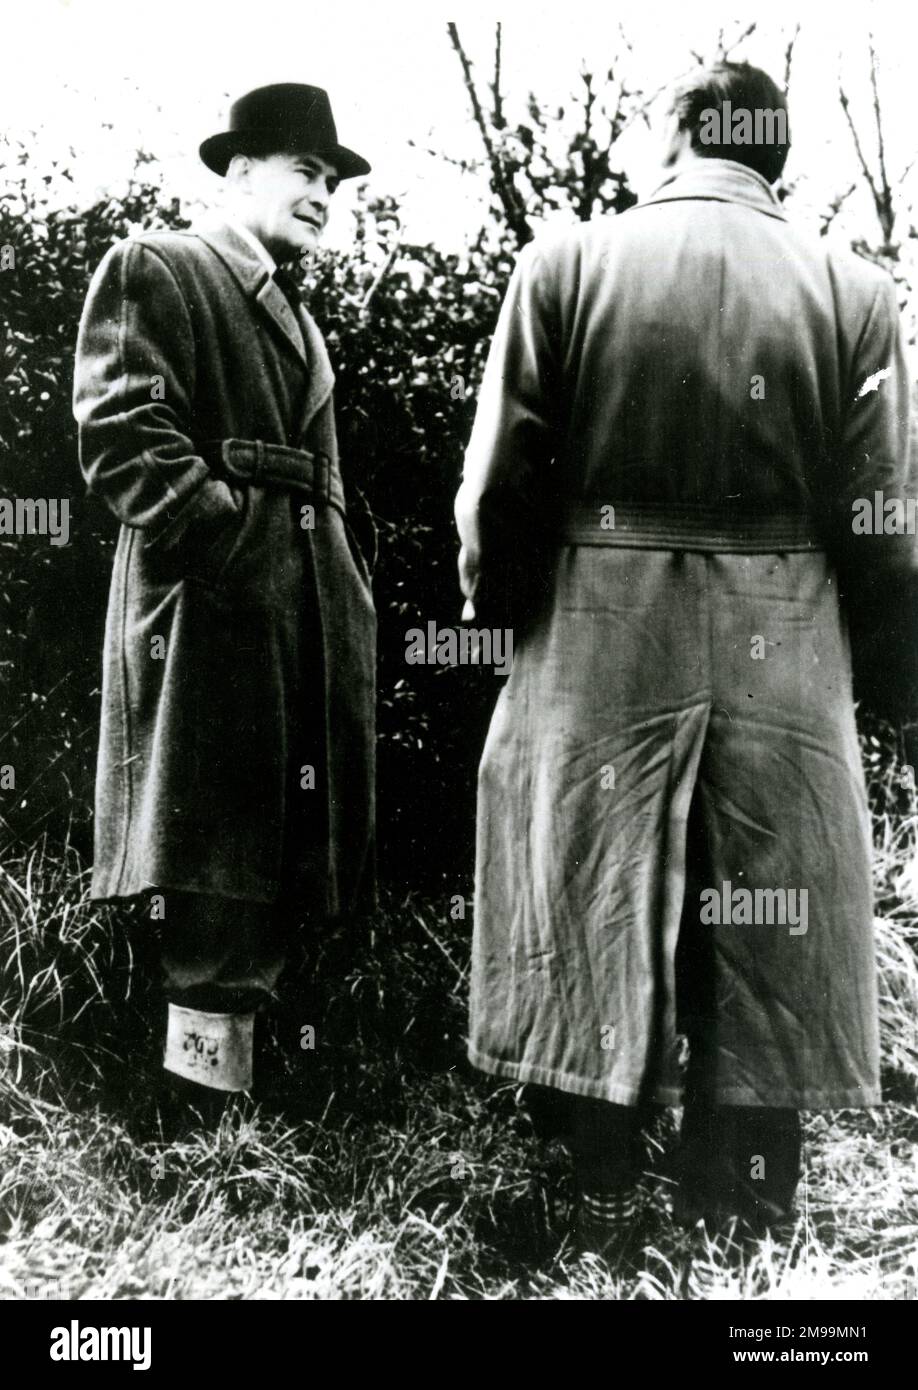 Detective Superintendent Alec Spooner of Warwickshire CID, investigating the murder of Charlie Walton in Lower Quinton, Warwickshire. Charles Walton (1870-1945), victim of the so-called Witchcraft Murder, was found dead near a hedgerow on the evening of 14 February 1945, killed with his own walking stick and agricultural tools (a pitchfork and a slash hook). The case is the oldest unsolved murder in Warwickshire Constabulary records. Stock Photo